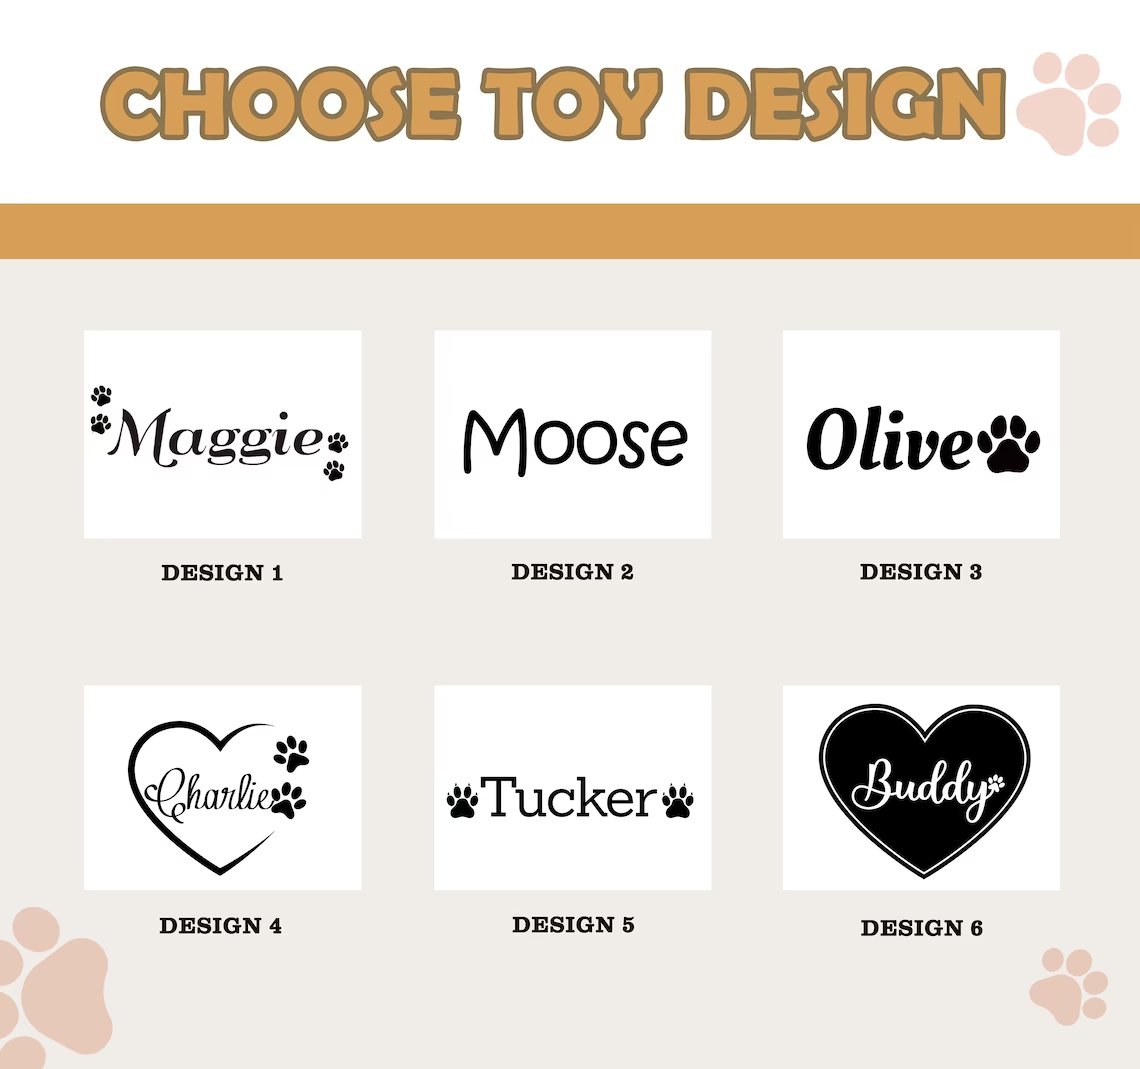 Personalized Dog Bone Toy with Name Embroidered Pet Toy - GexWorldwide